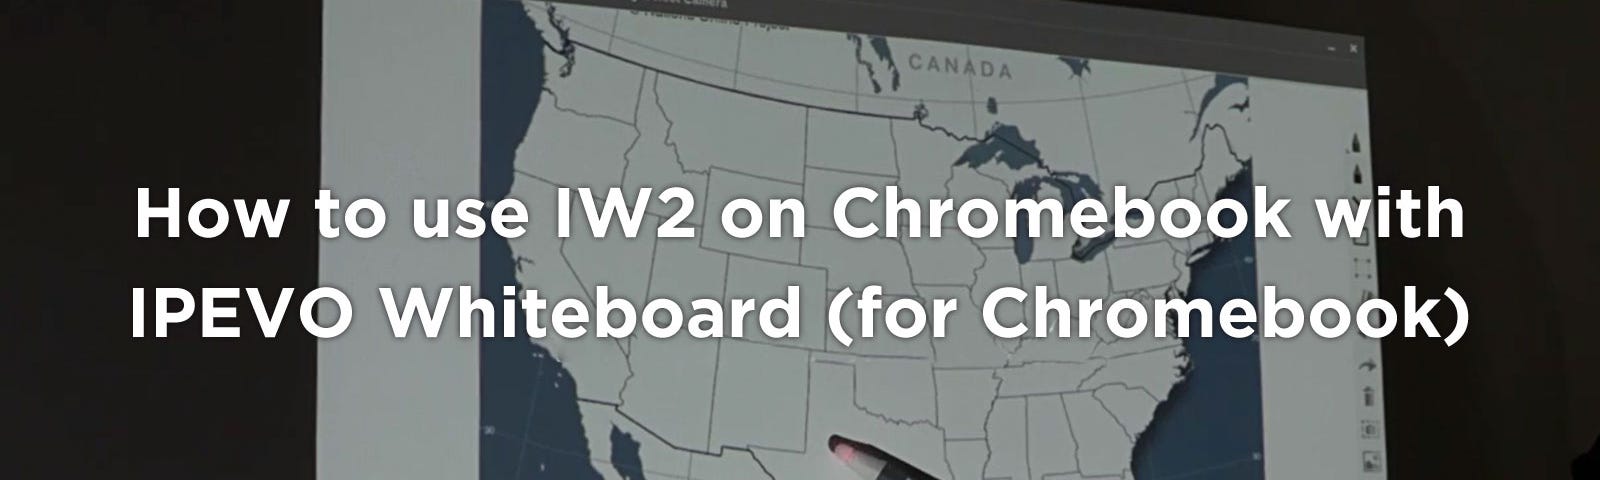 How to use IW2 on Chromebook with IPEVO Whiteboard (for Chromebook)